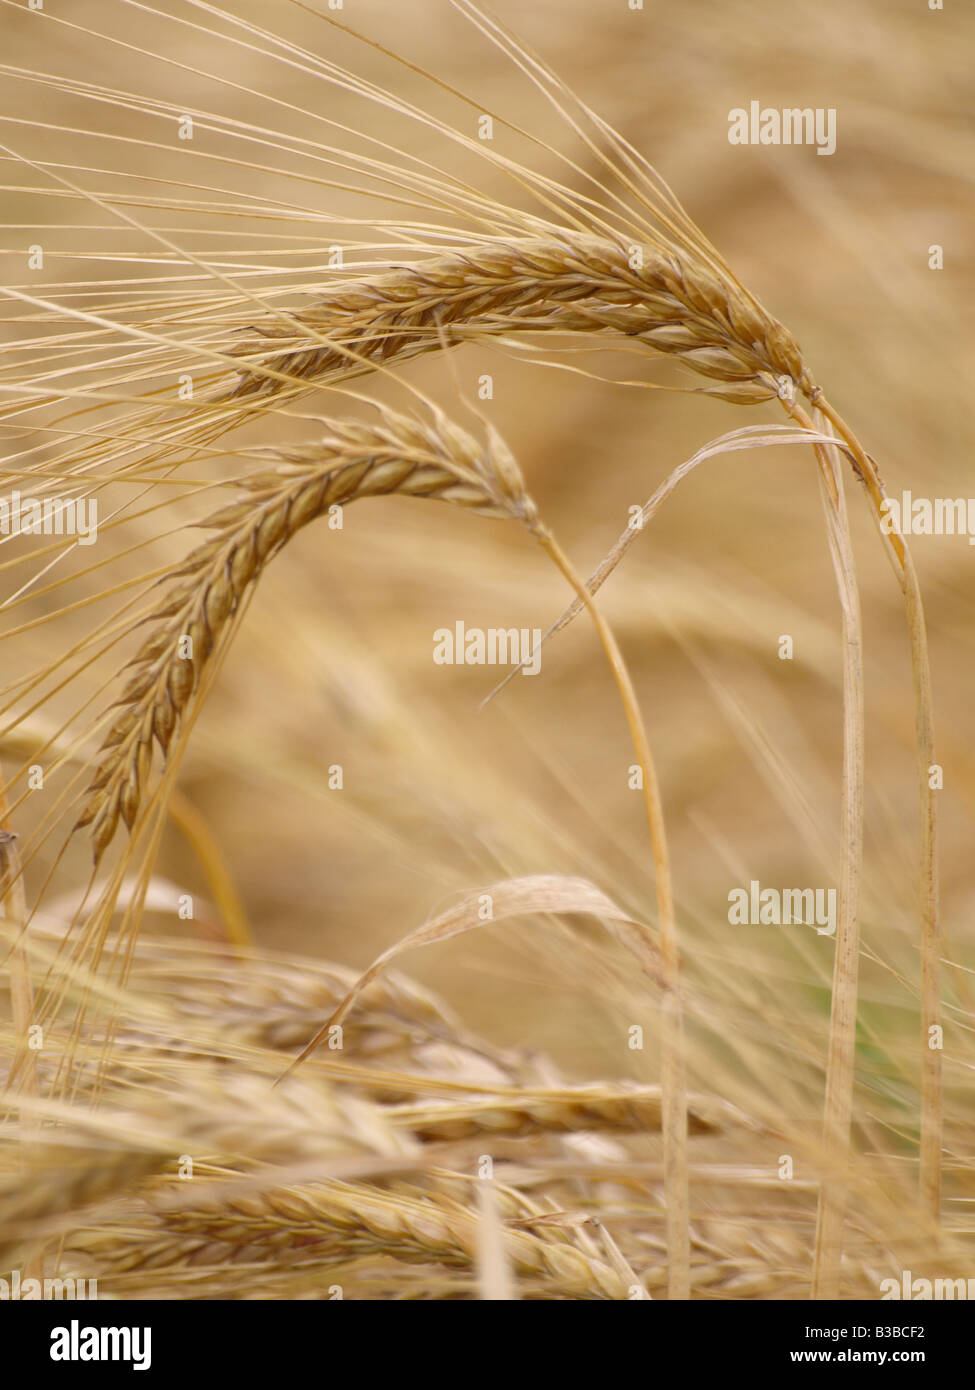 Two Ears of wheat. Stock Photo